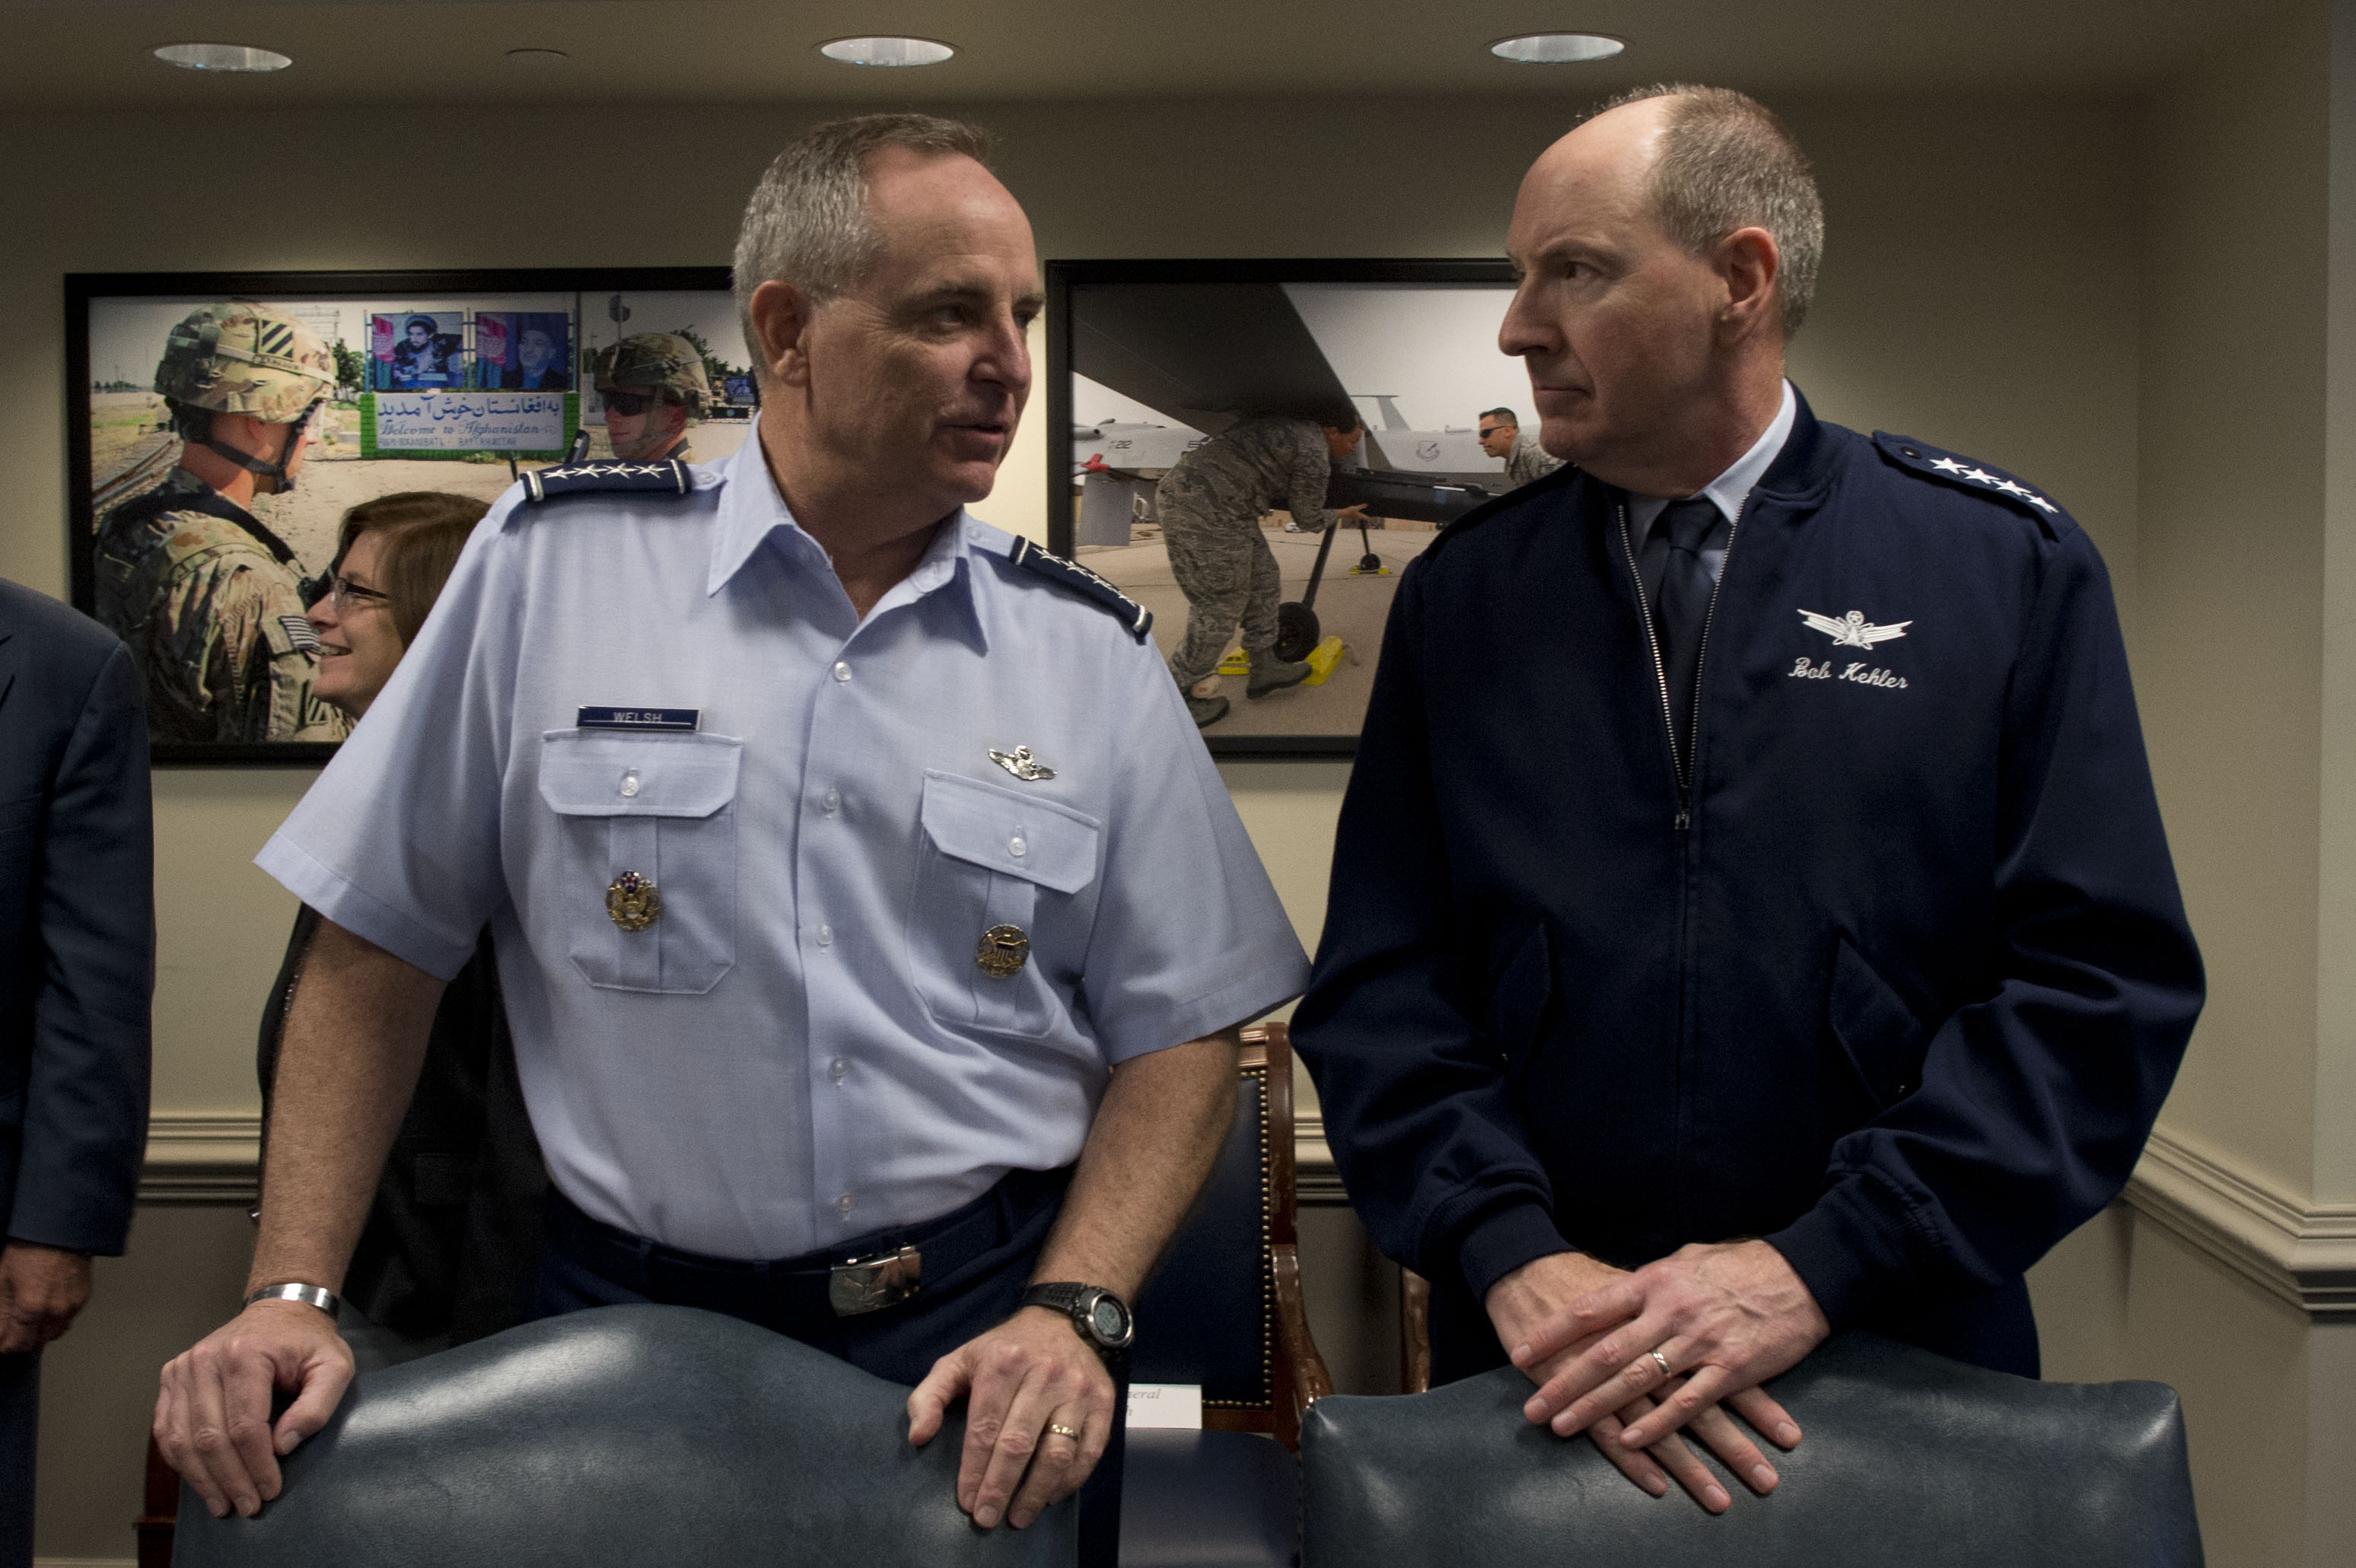 Mark W   scammers using stolen pics GENERAL MARK WELSH111 (AIRFORCE) U.S._Air_Force_Gen._Mark_Welsh,_left,_the_chief_of_staff_of_the_Air_Force,_speaks_with_Gen._Bob_Kehler,_the_commander_of_U.S._Strategic_Command,_during_a_senior_leadership_council_meeting_hosted_by_Secretary_130614-D-BW835-038